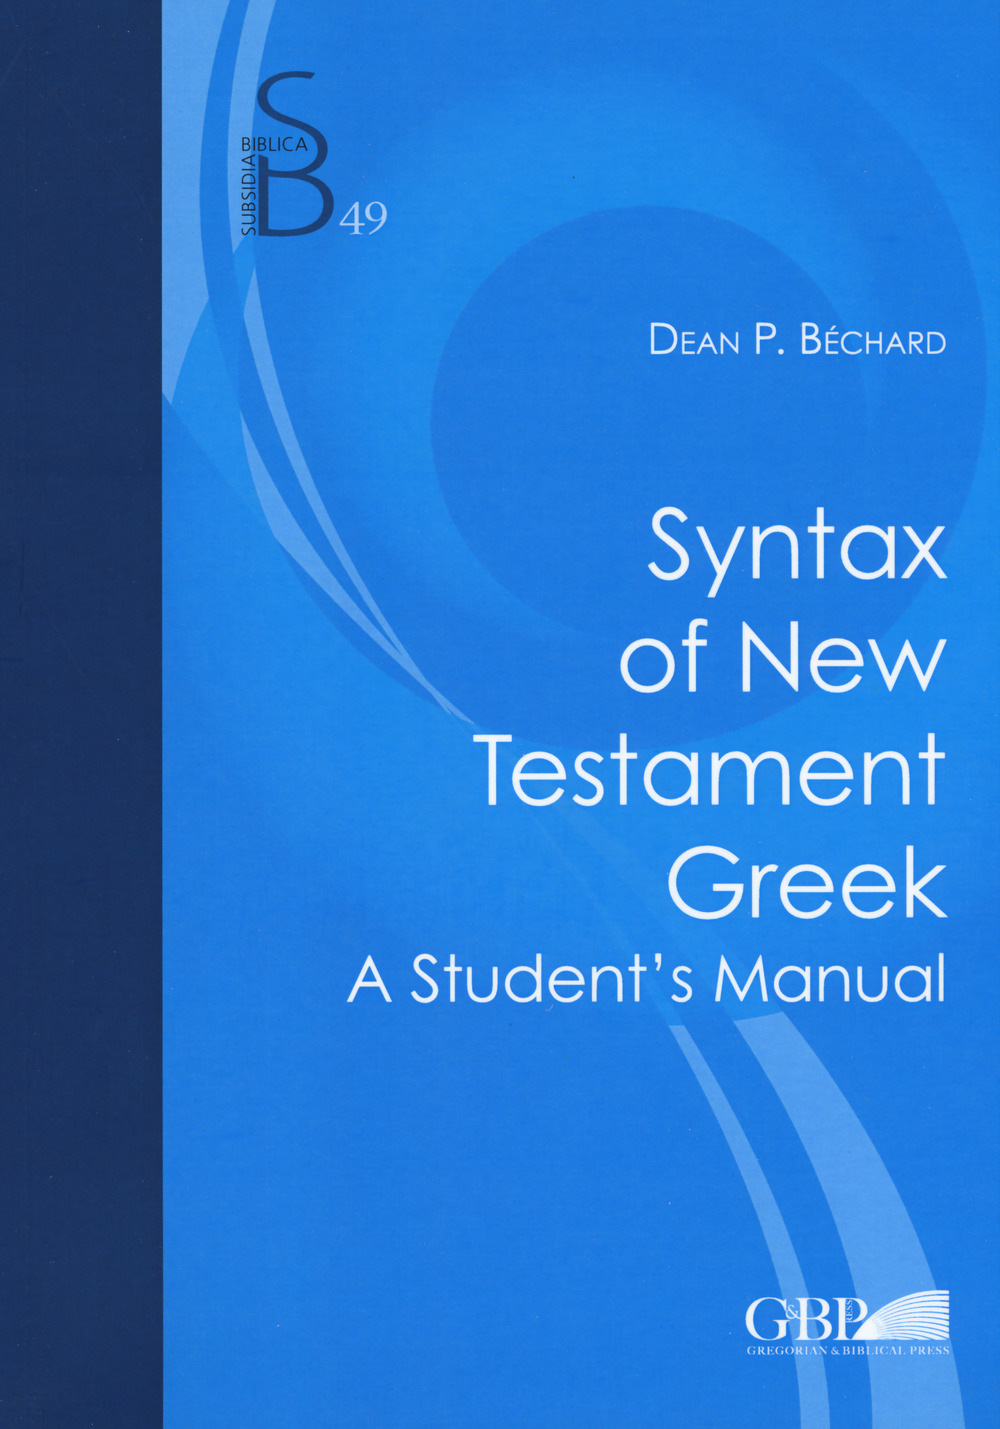 Syntax of new testament greek. A student's manual